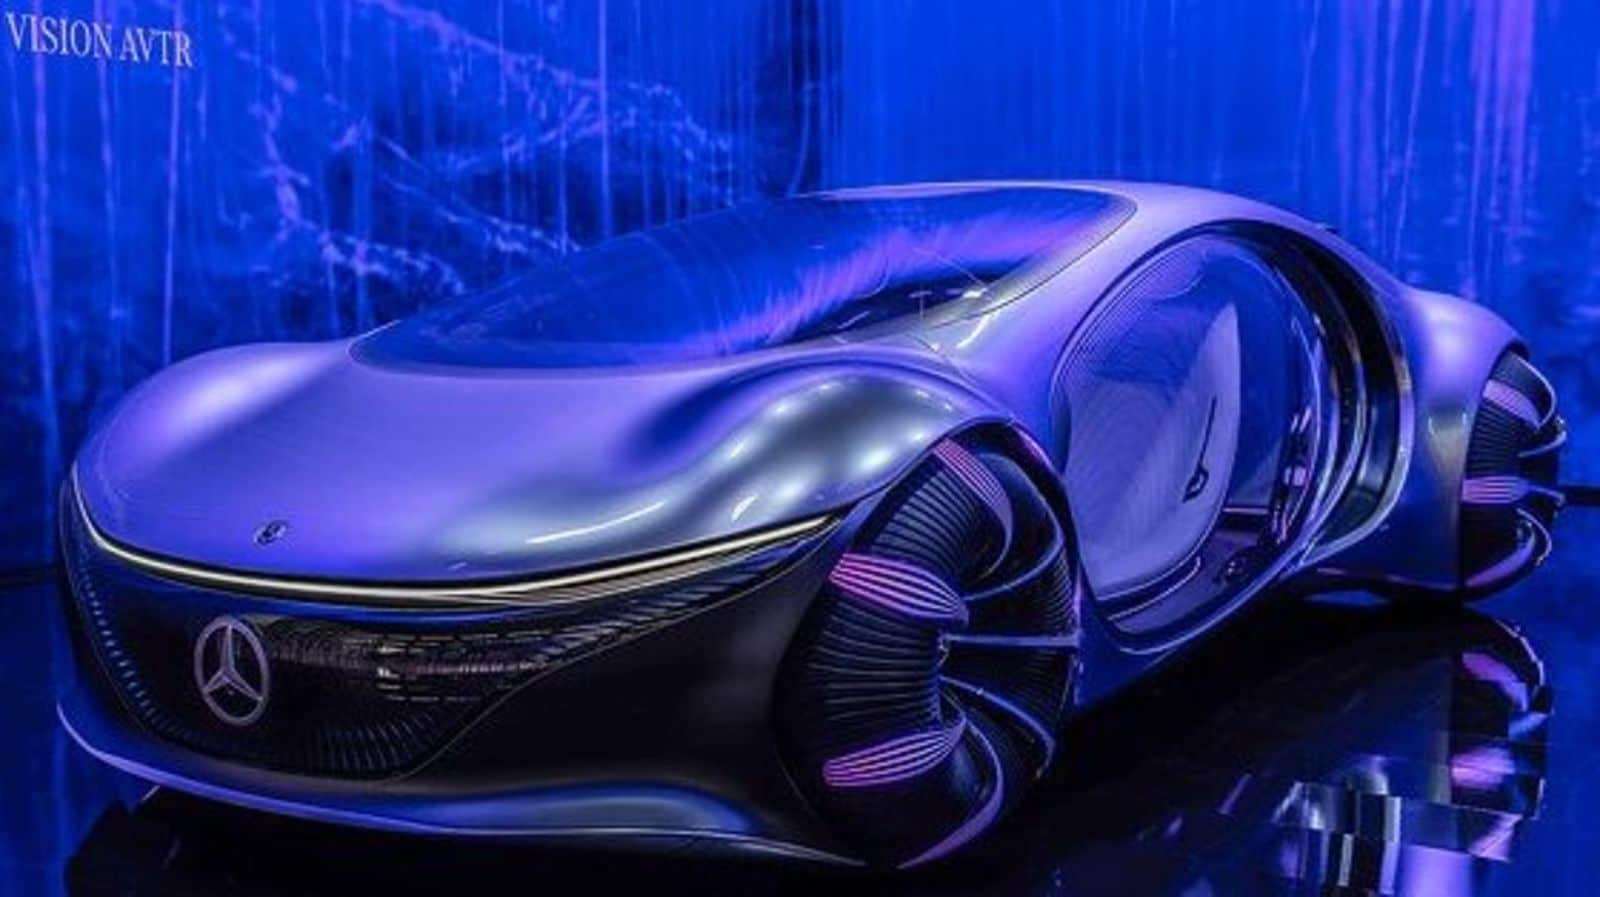 Its Alive We Ride in the MercedesBenz Vision AVTR Concept